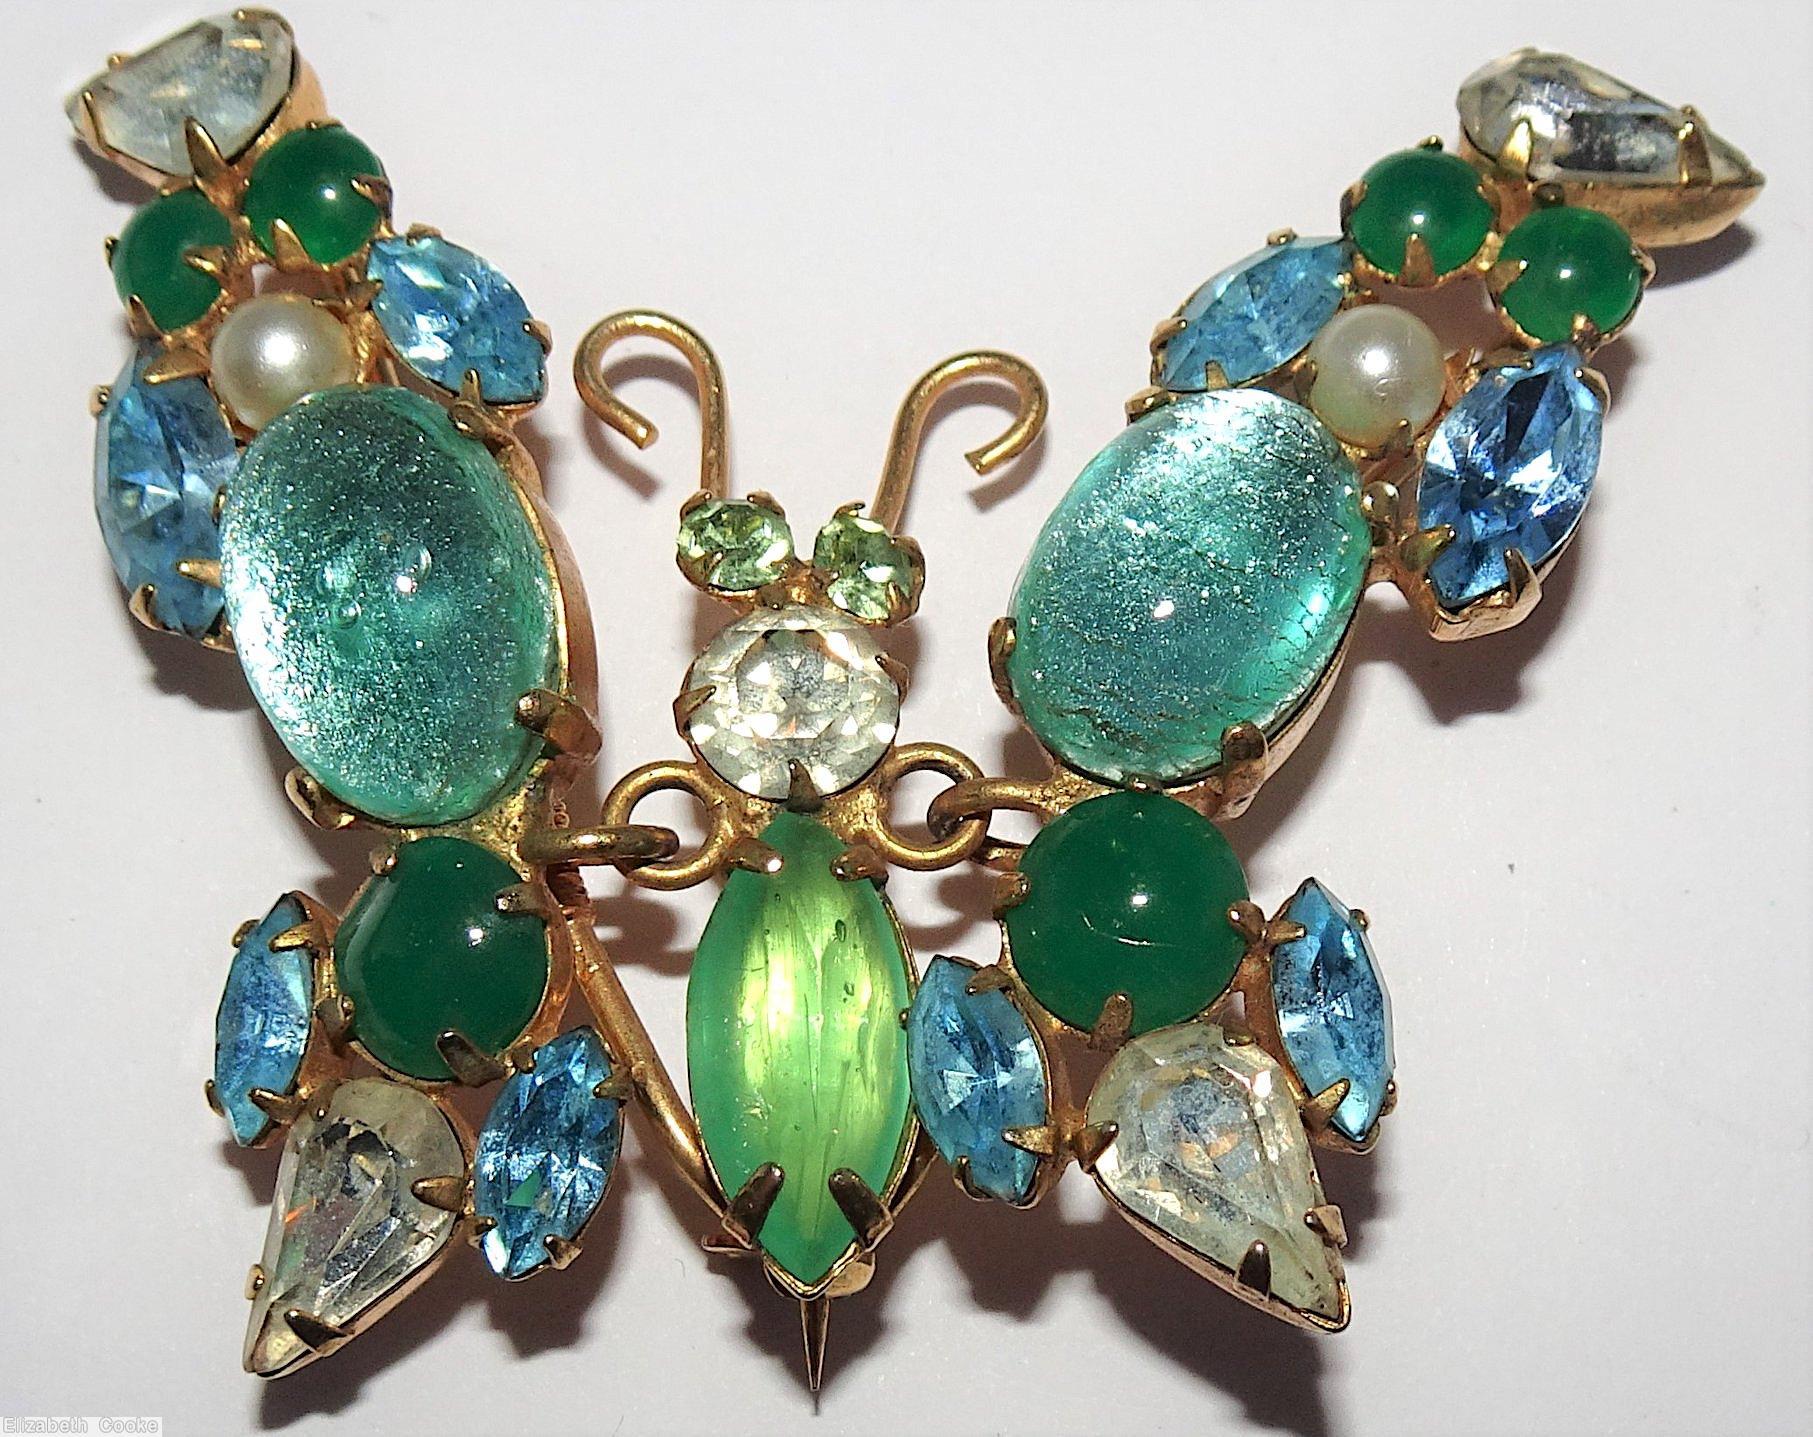 Schreiner trembling wing chained to body butterfly emerald chaton faux pearl seeds crystal teardrop blue ice blue goldtone jewelry